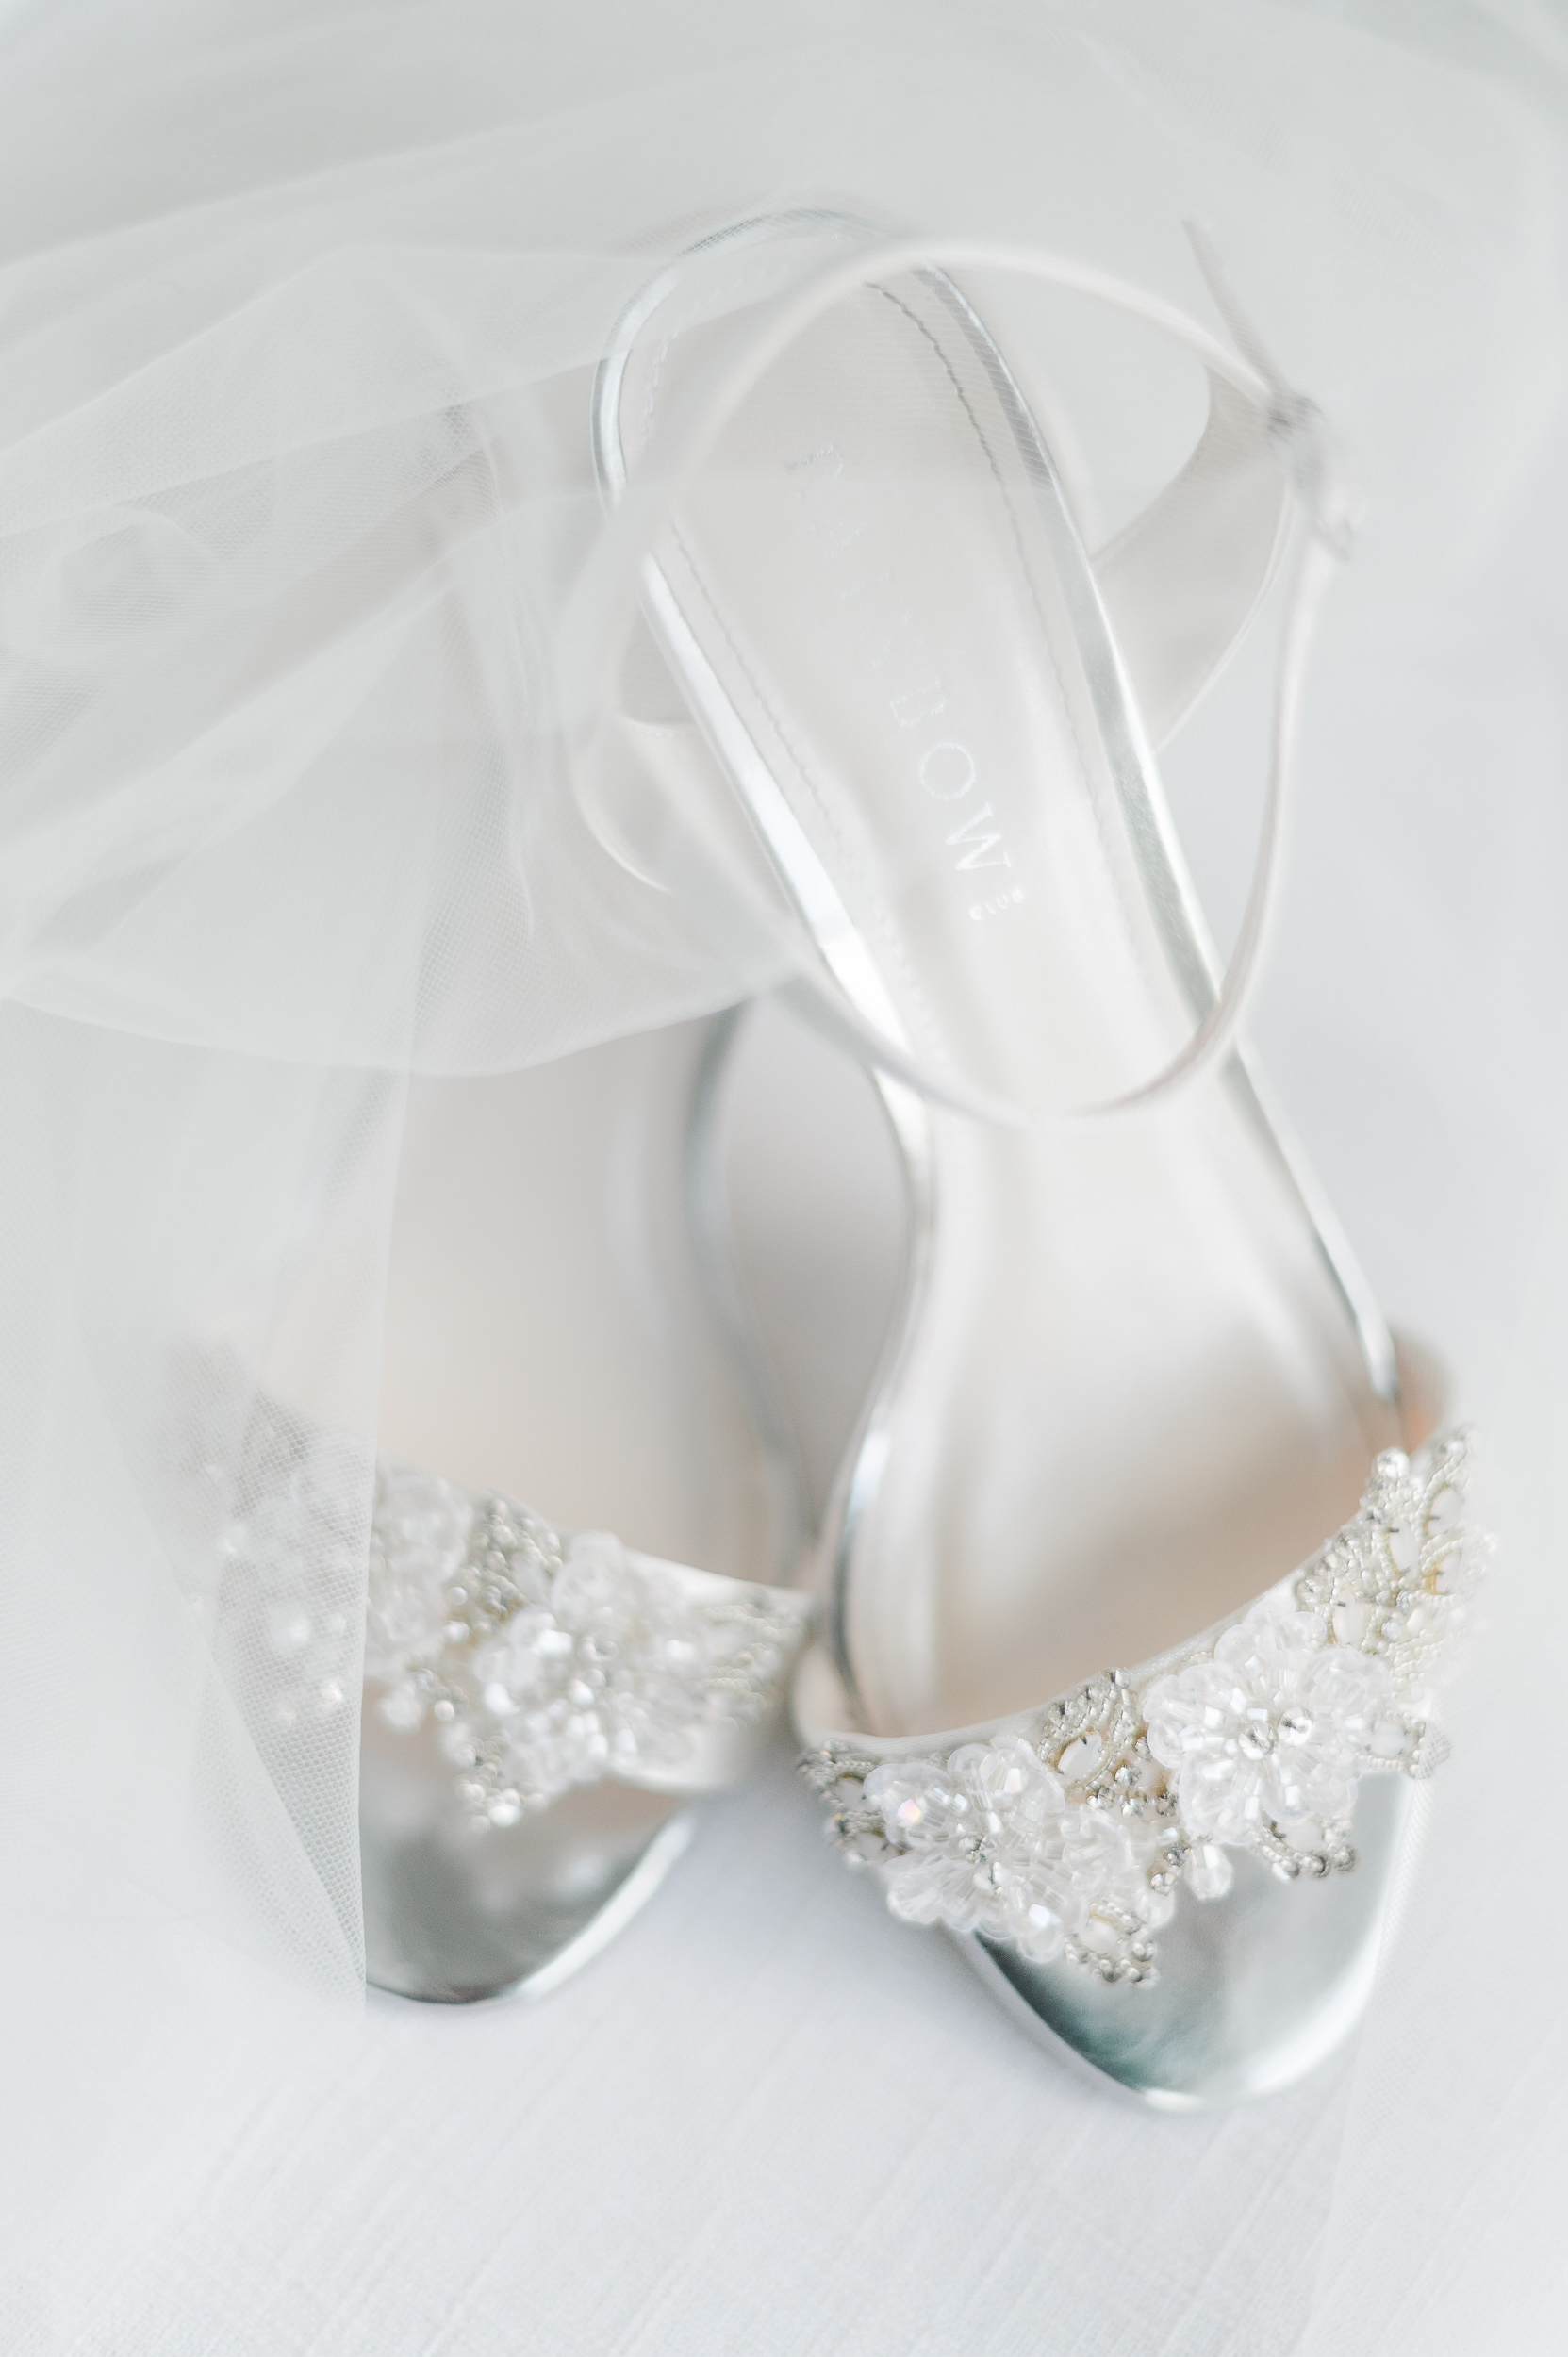 Detail image of a bride's wedding shoes with her veil laying over them.